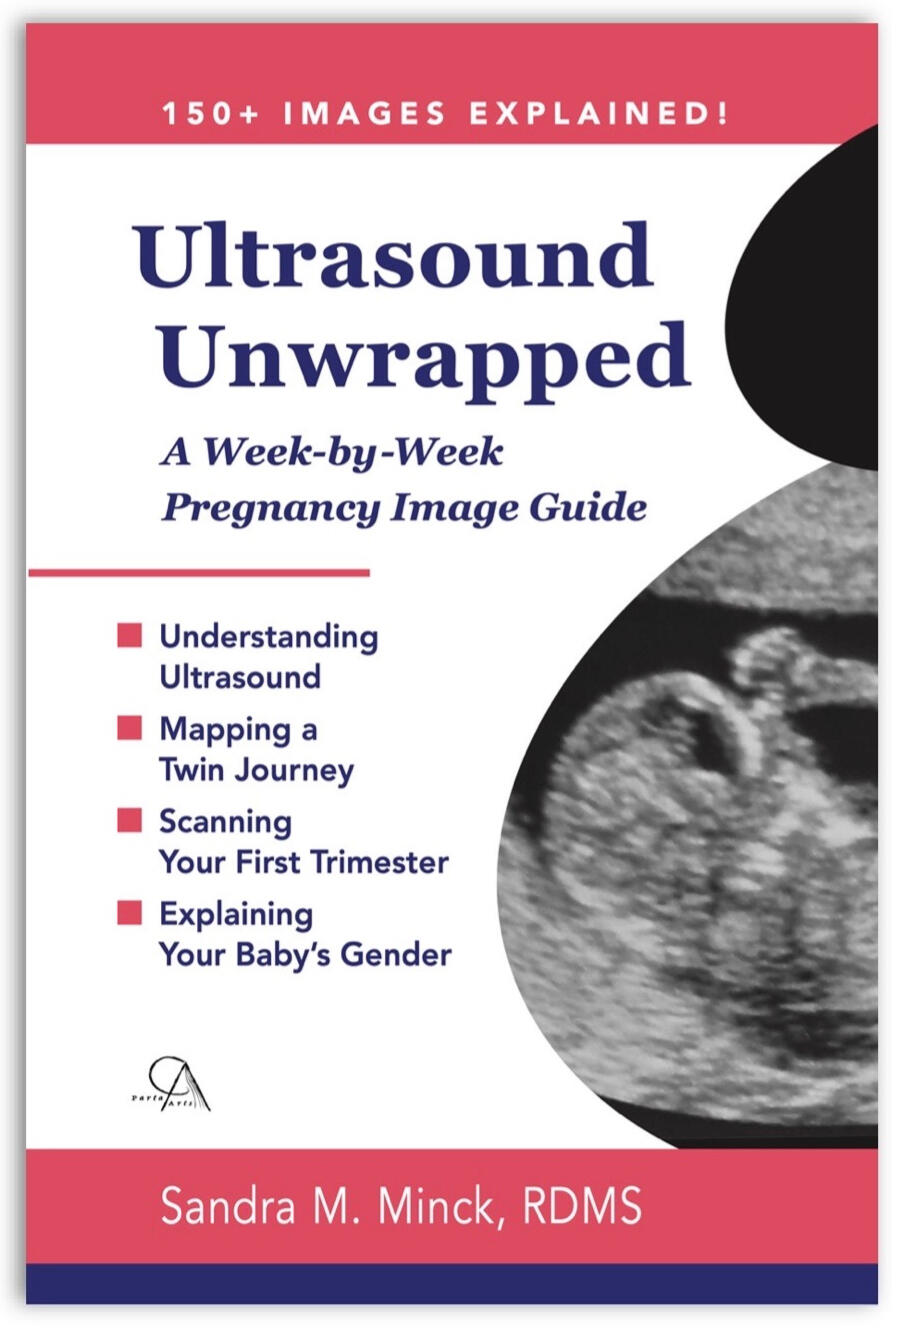 Ultrasound Unwrapped